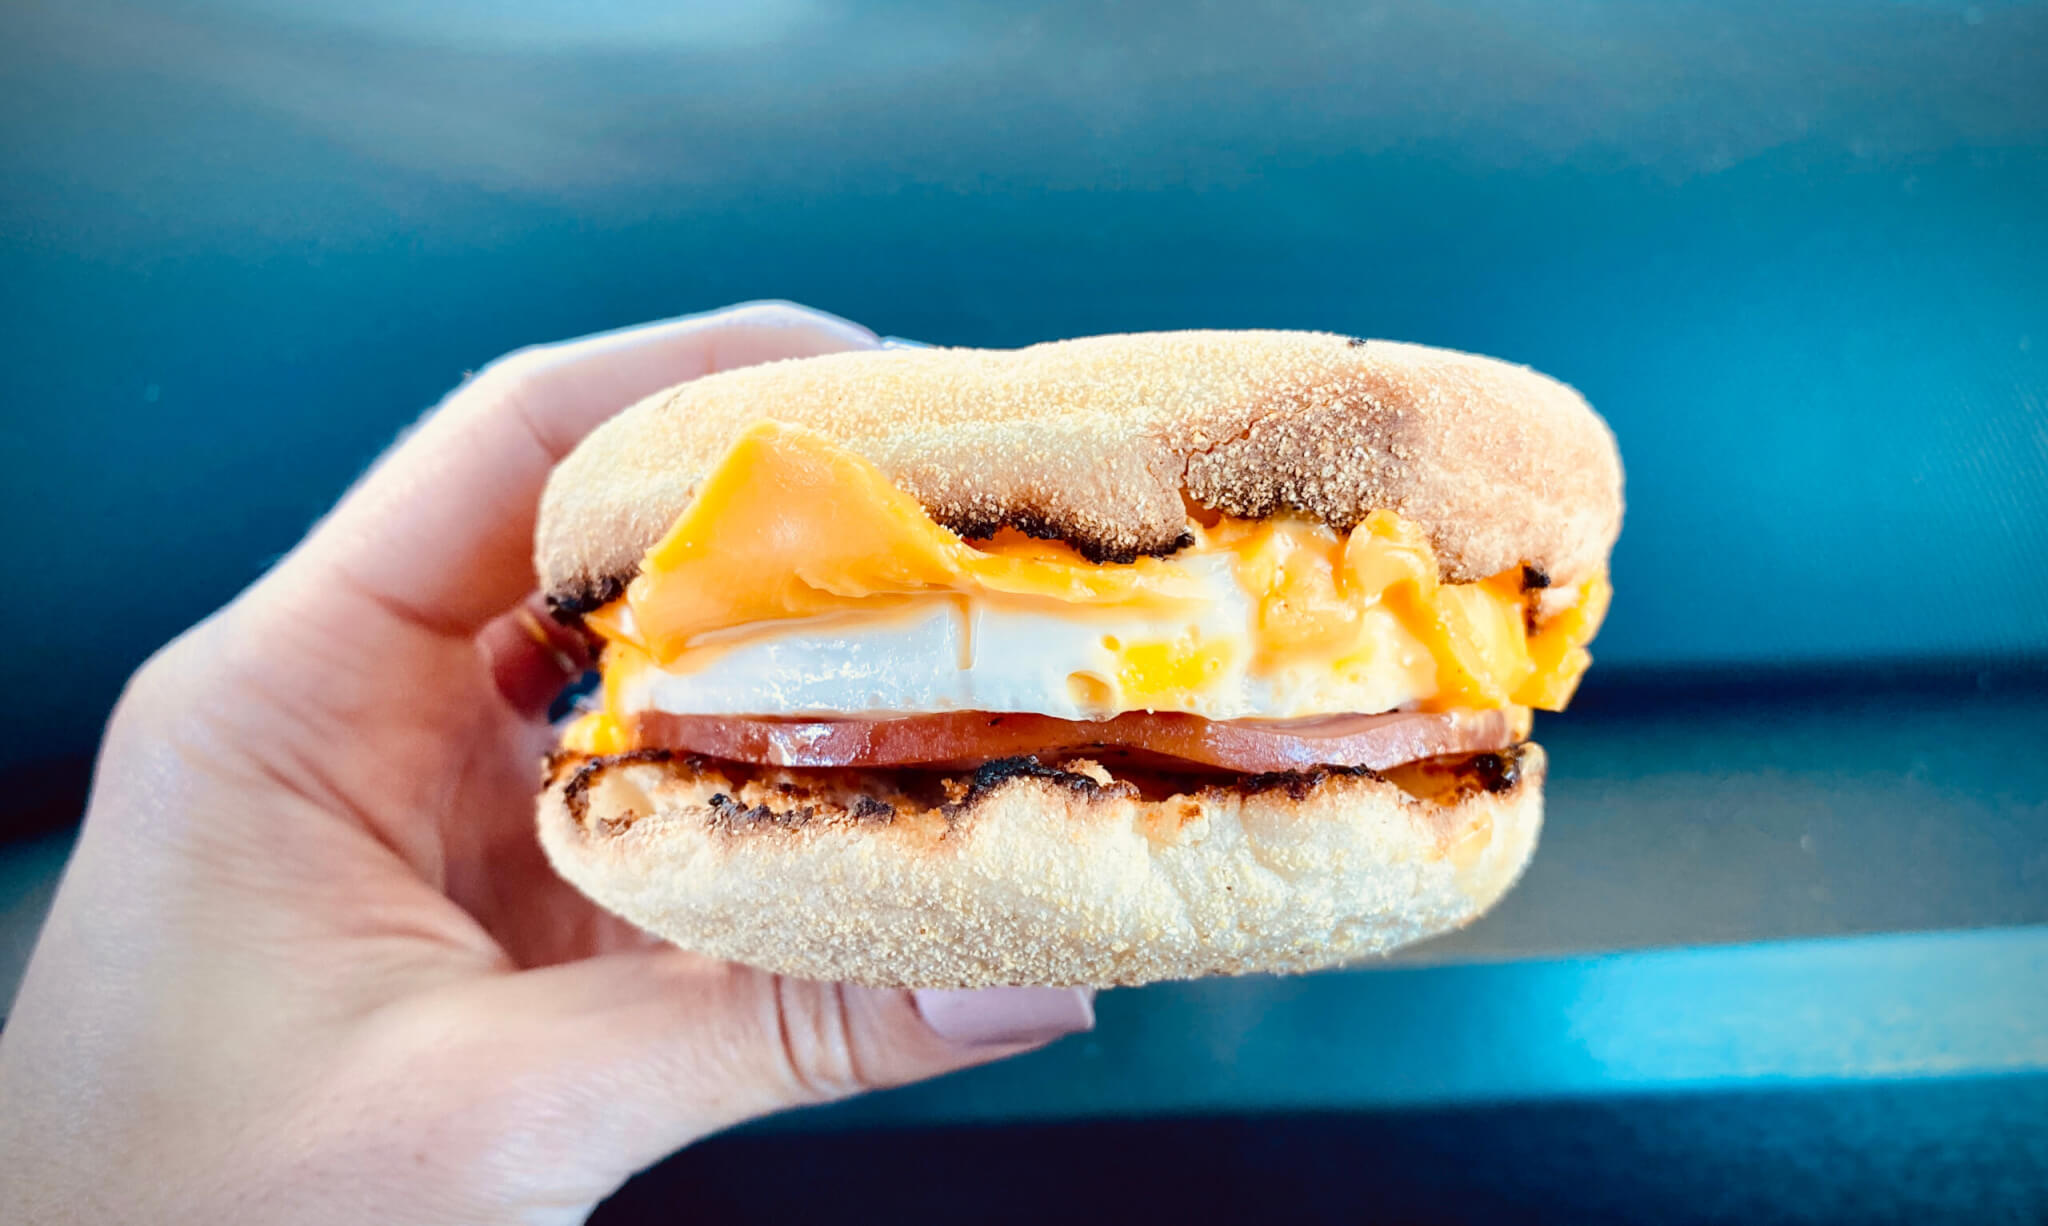 McDonald's Egg McMuffin with Canadian bacon